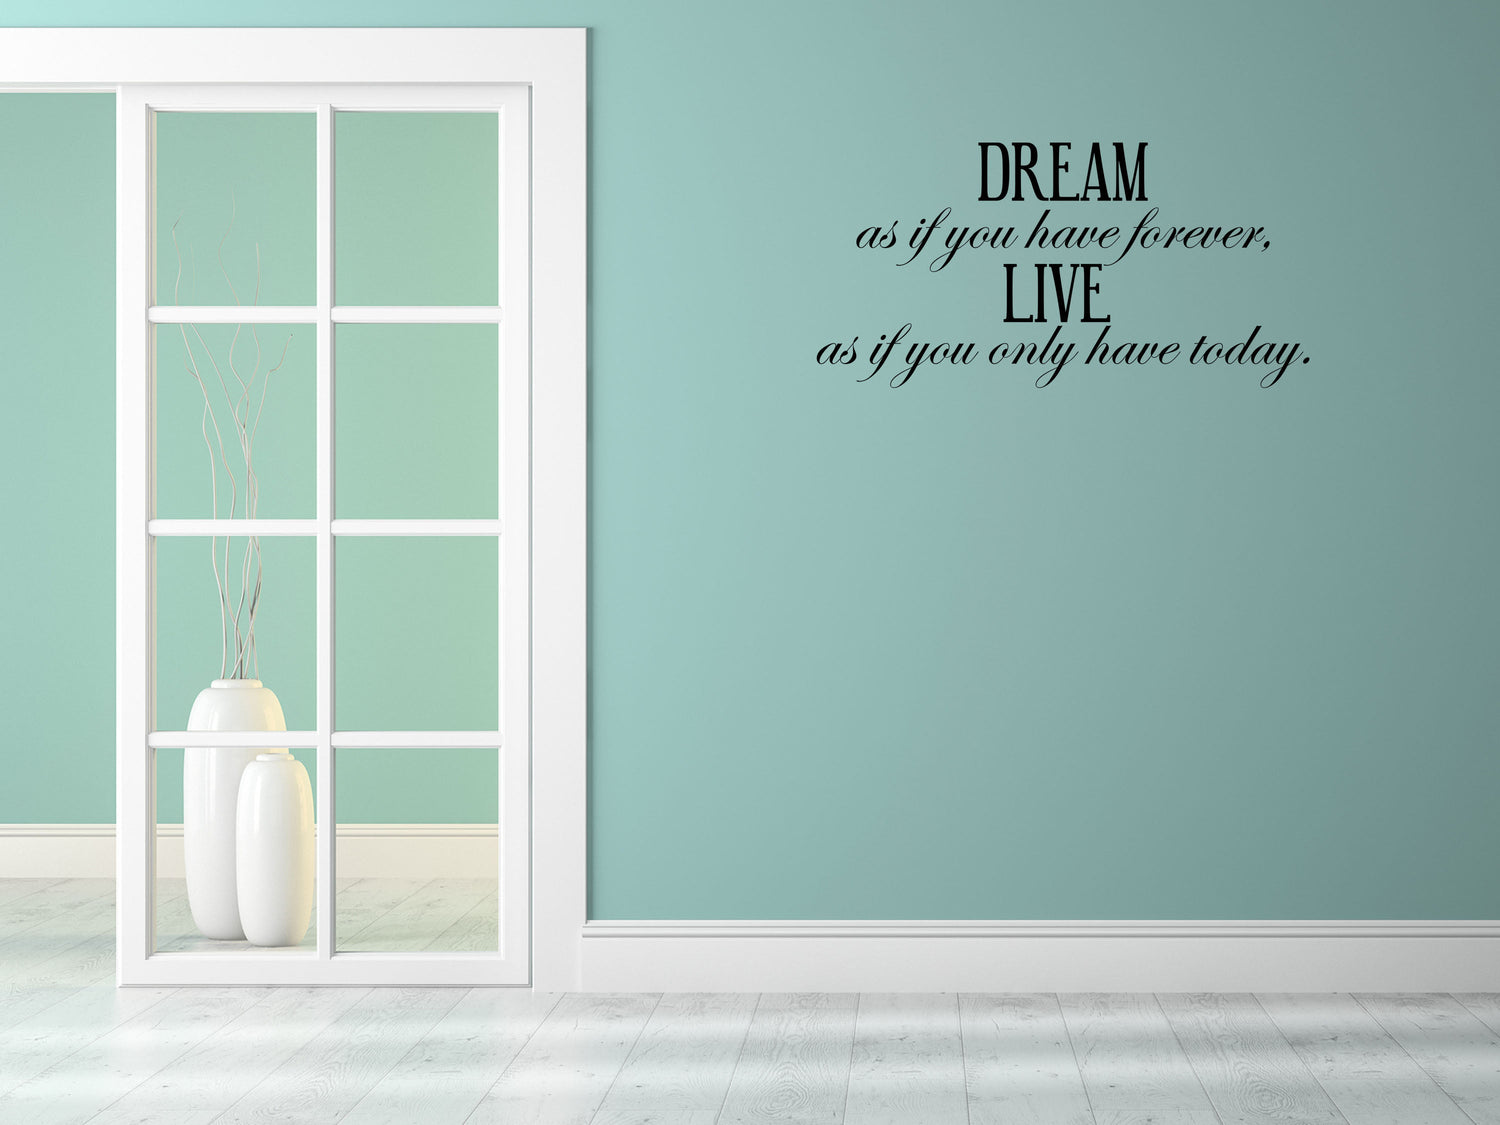 Dream As If You Have Forever - Inspirational Wall Decals Vinyl Wall Decal Inspirational Wall Signs 